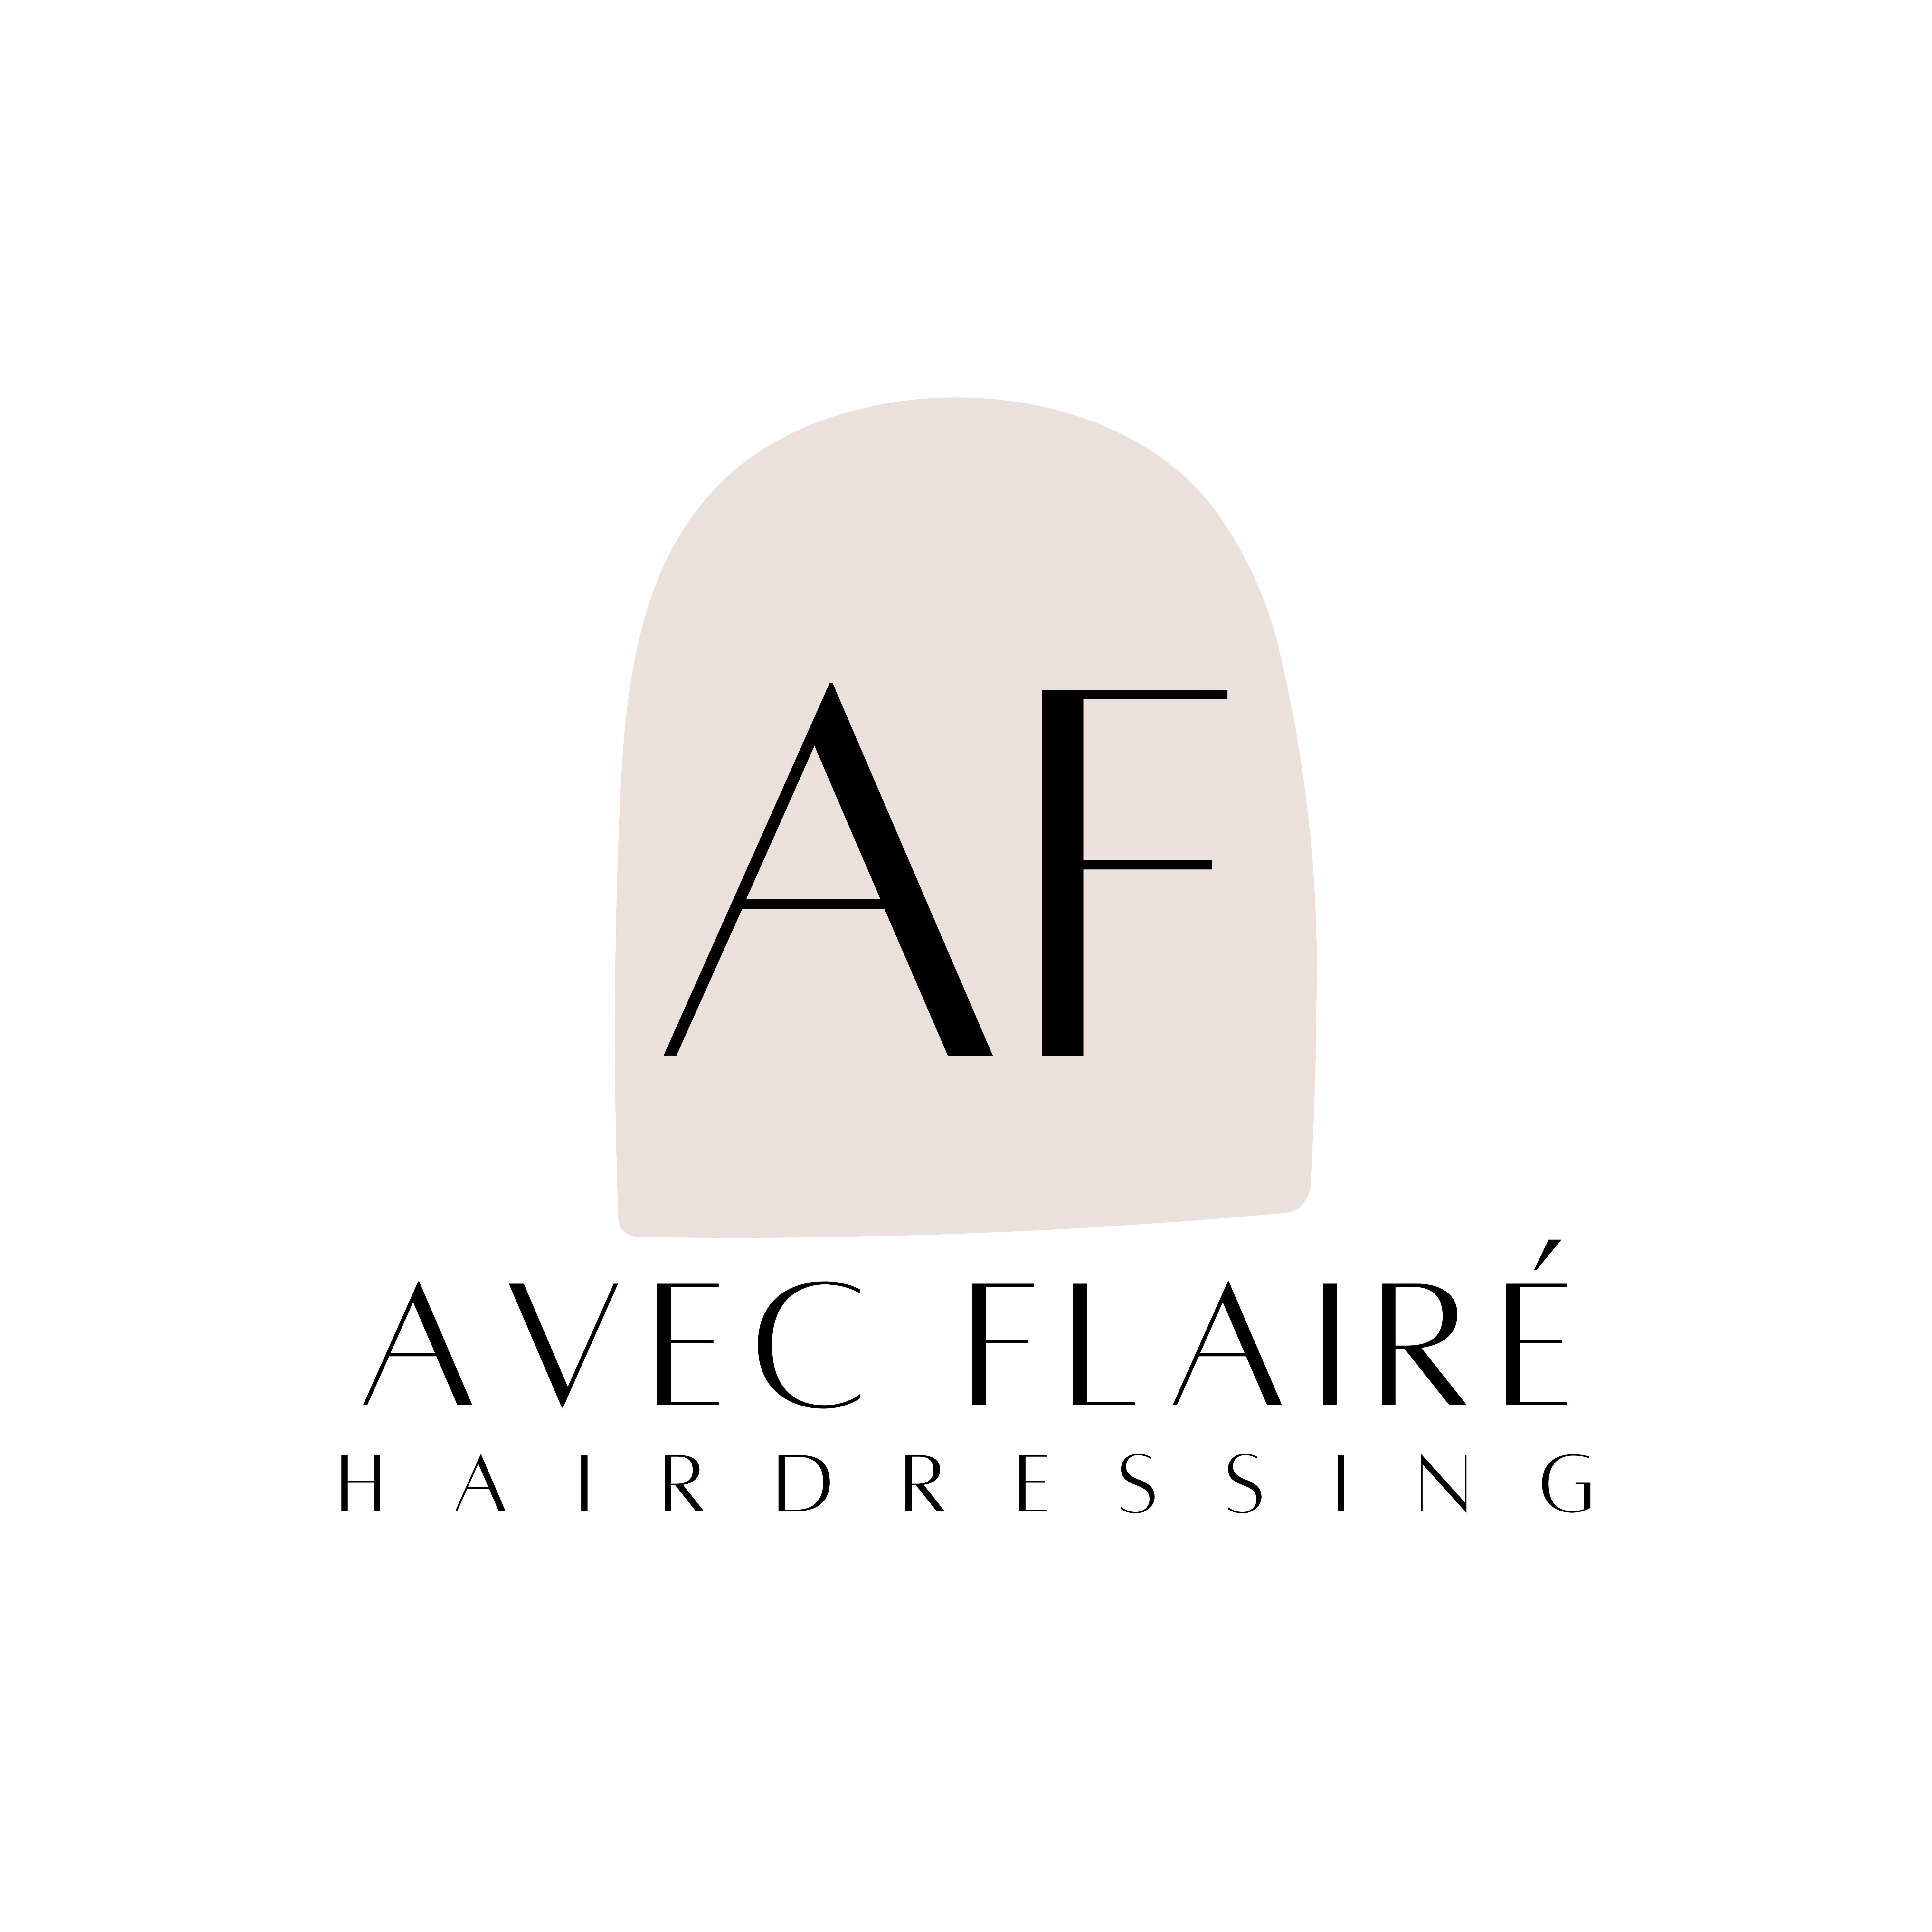 Avec Flaire Hairdressing